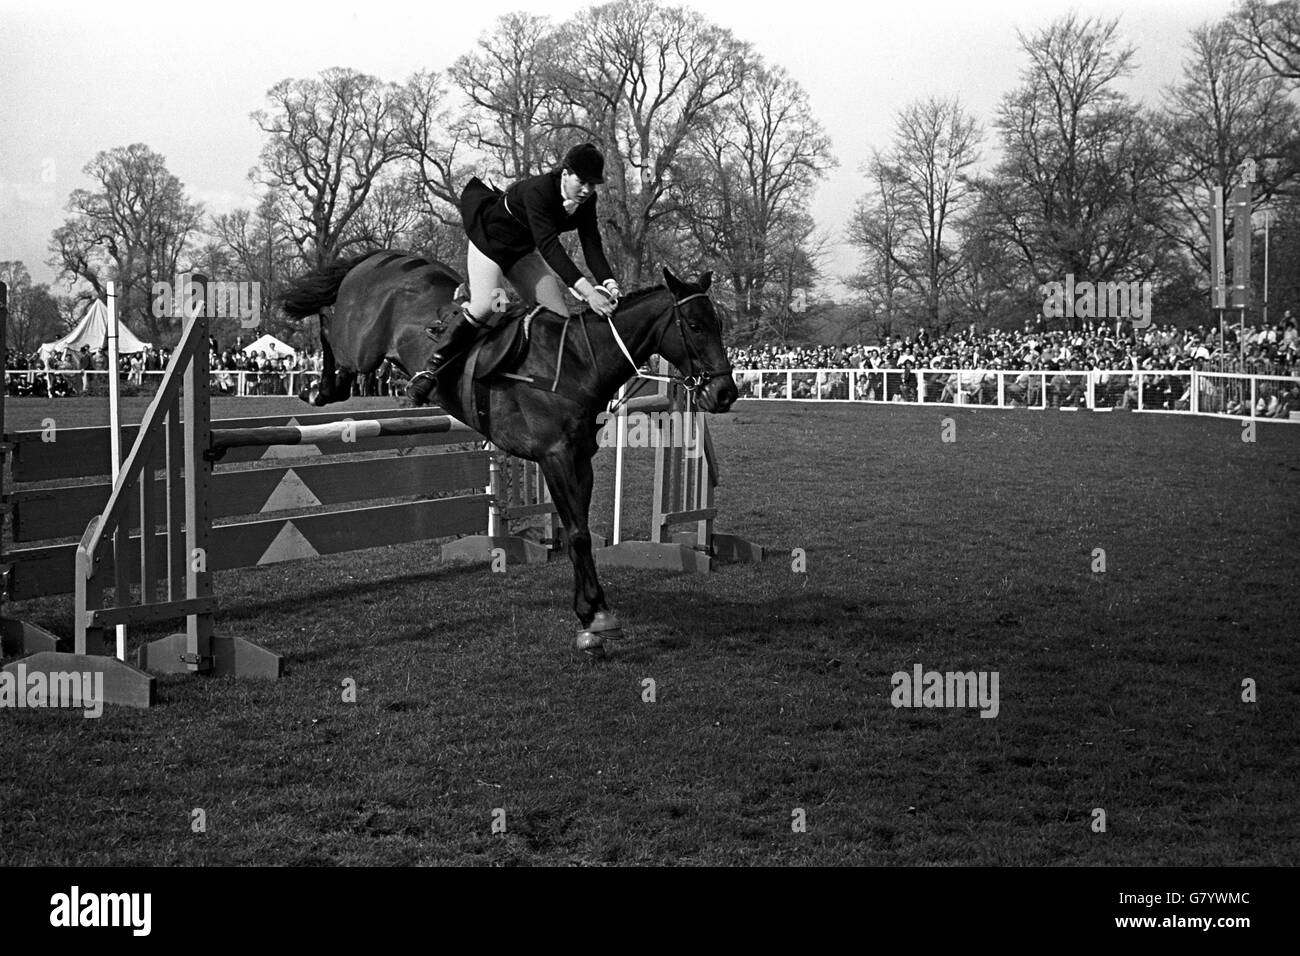 Middlesex Hospital nurse, jane Bullen, 19, up on 'Our Nobby', takes a jump during her clear round in the Badminton Horse Trials. Stock Photo